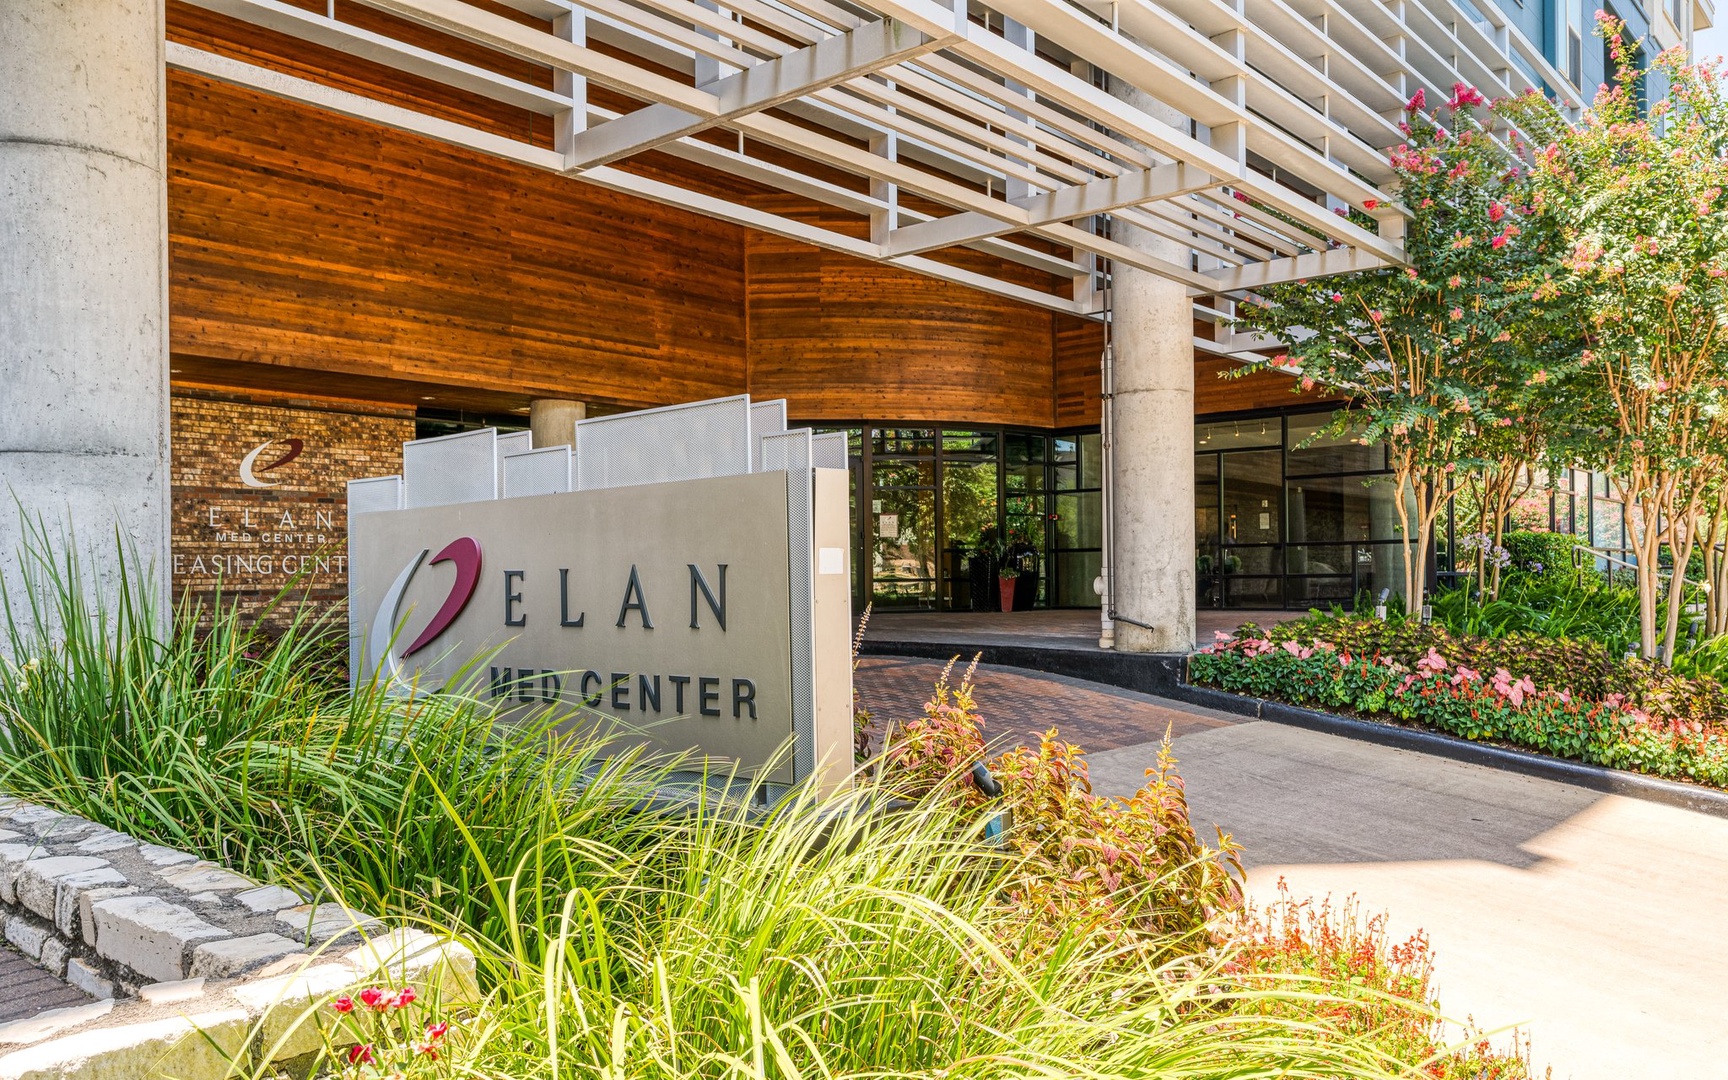 The main entrance to the Elan Med Center community